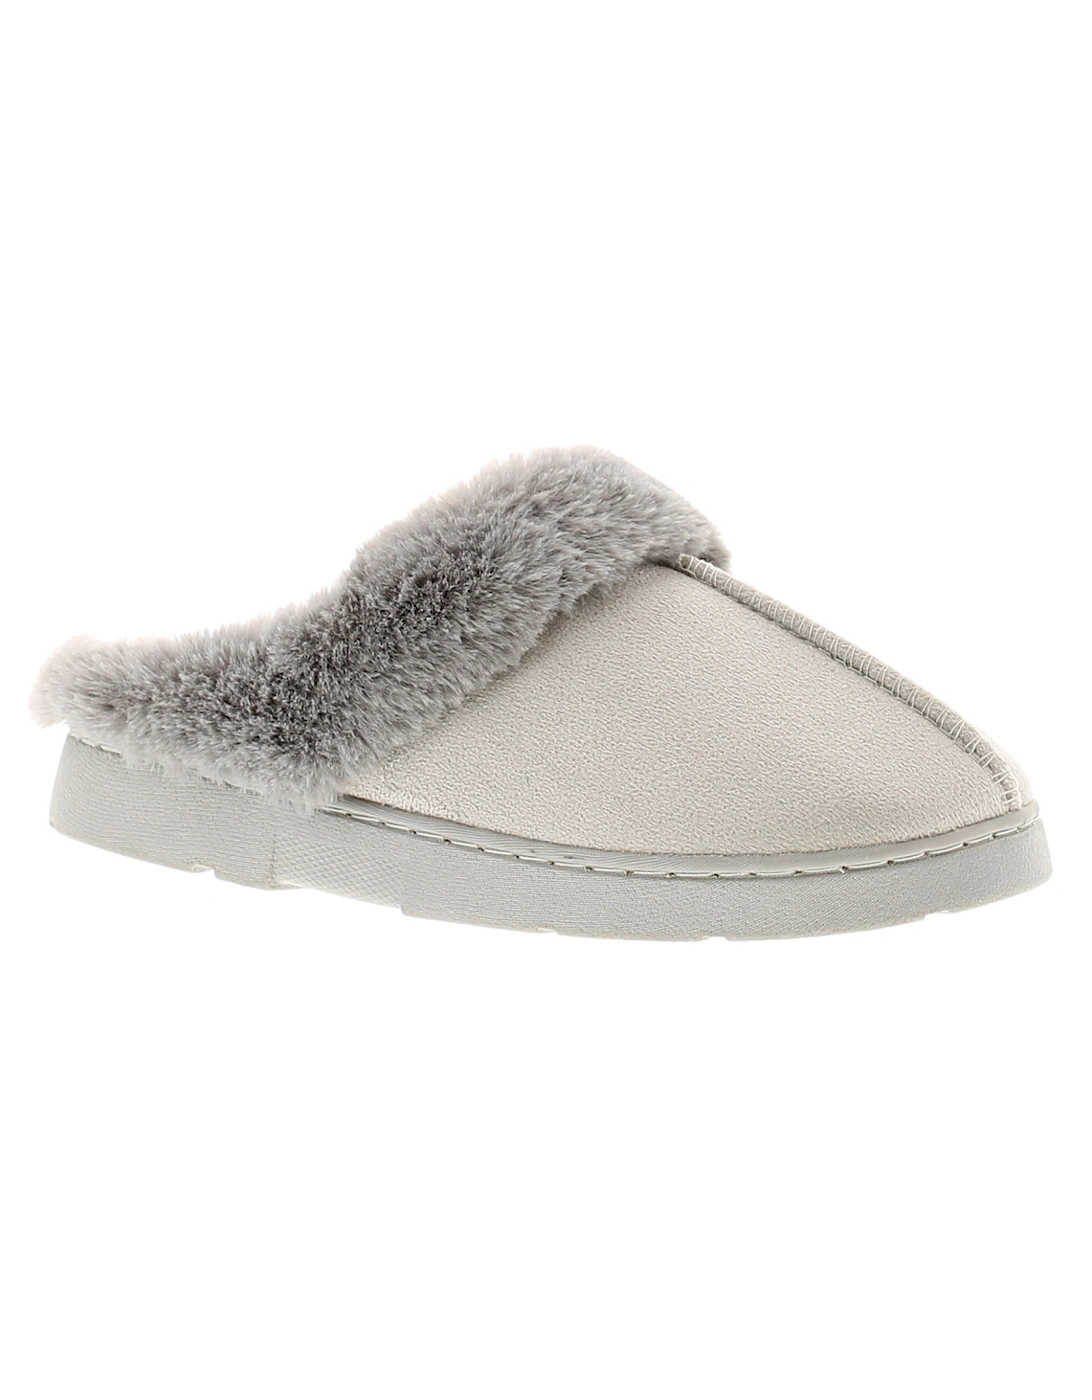 Womens Mule Slippers Decator Slip On grey UK Size, 6 of 5